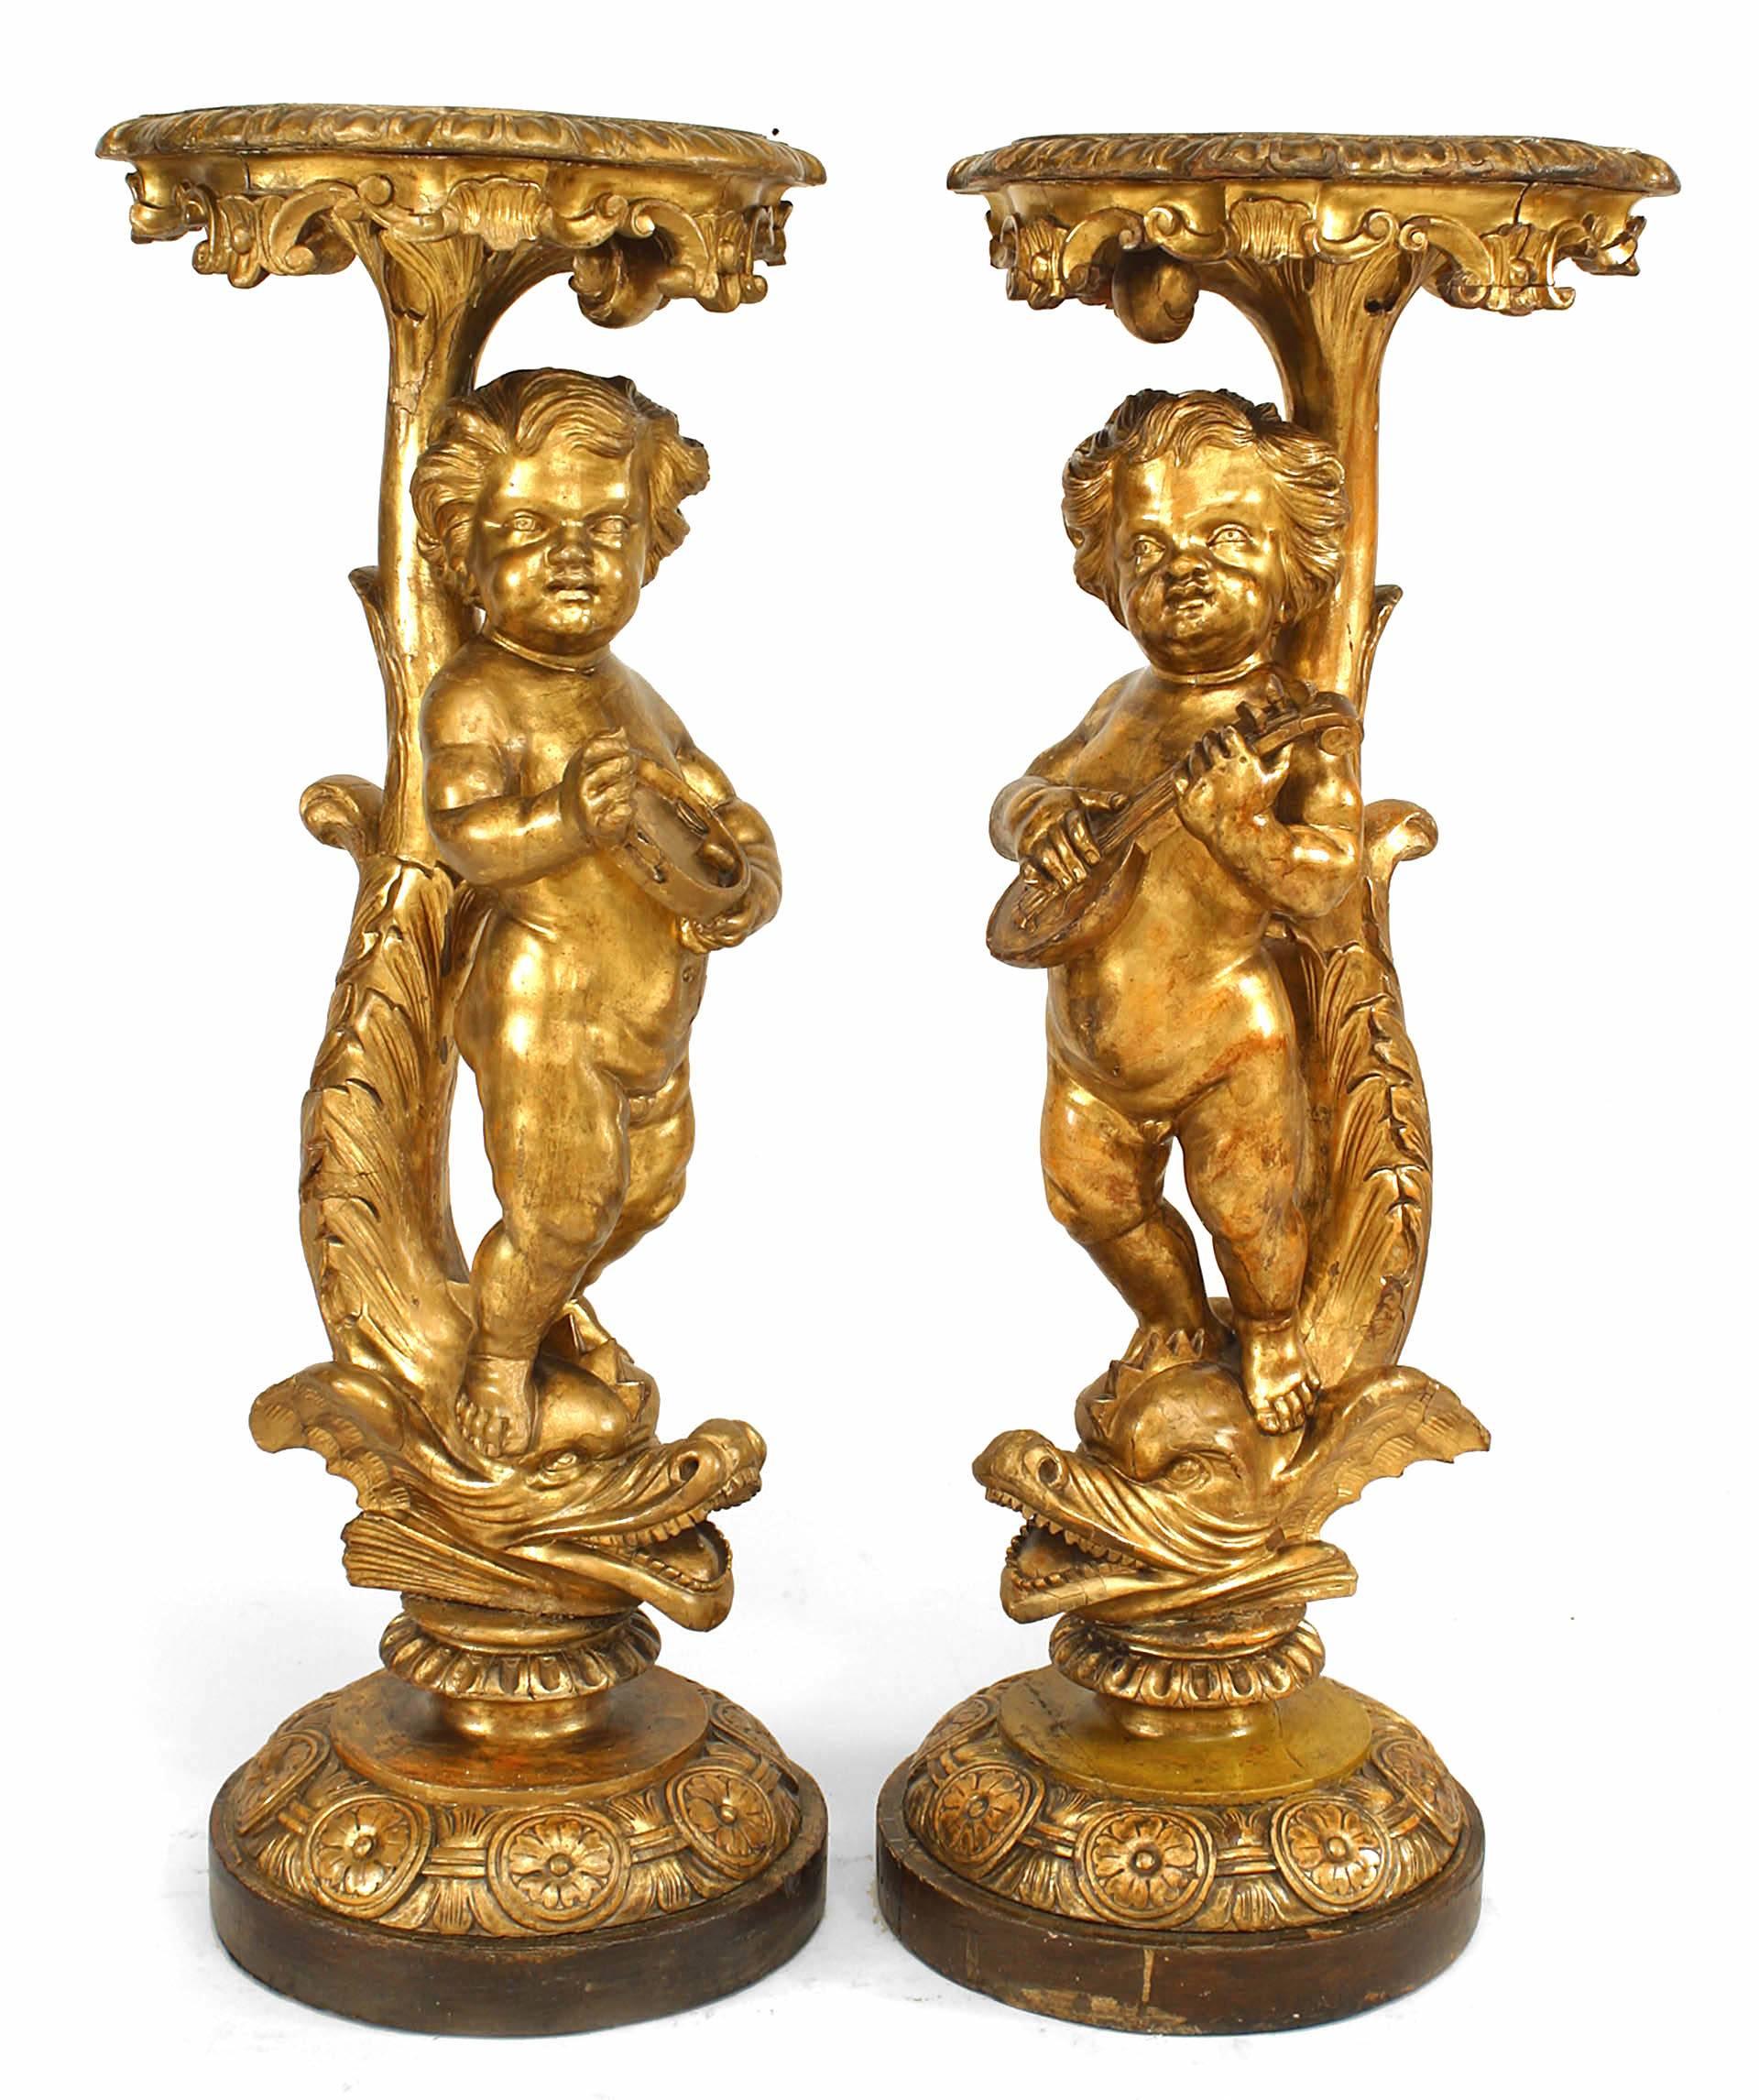 Pair of French Louis XV style (19th Cent) gilt pedestals with cherub figures playing musical instruments and standing on sea creatures.
